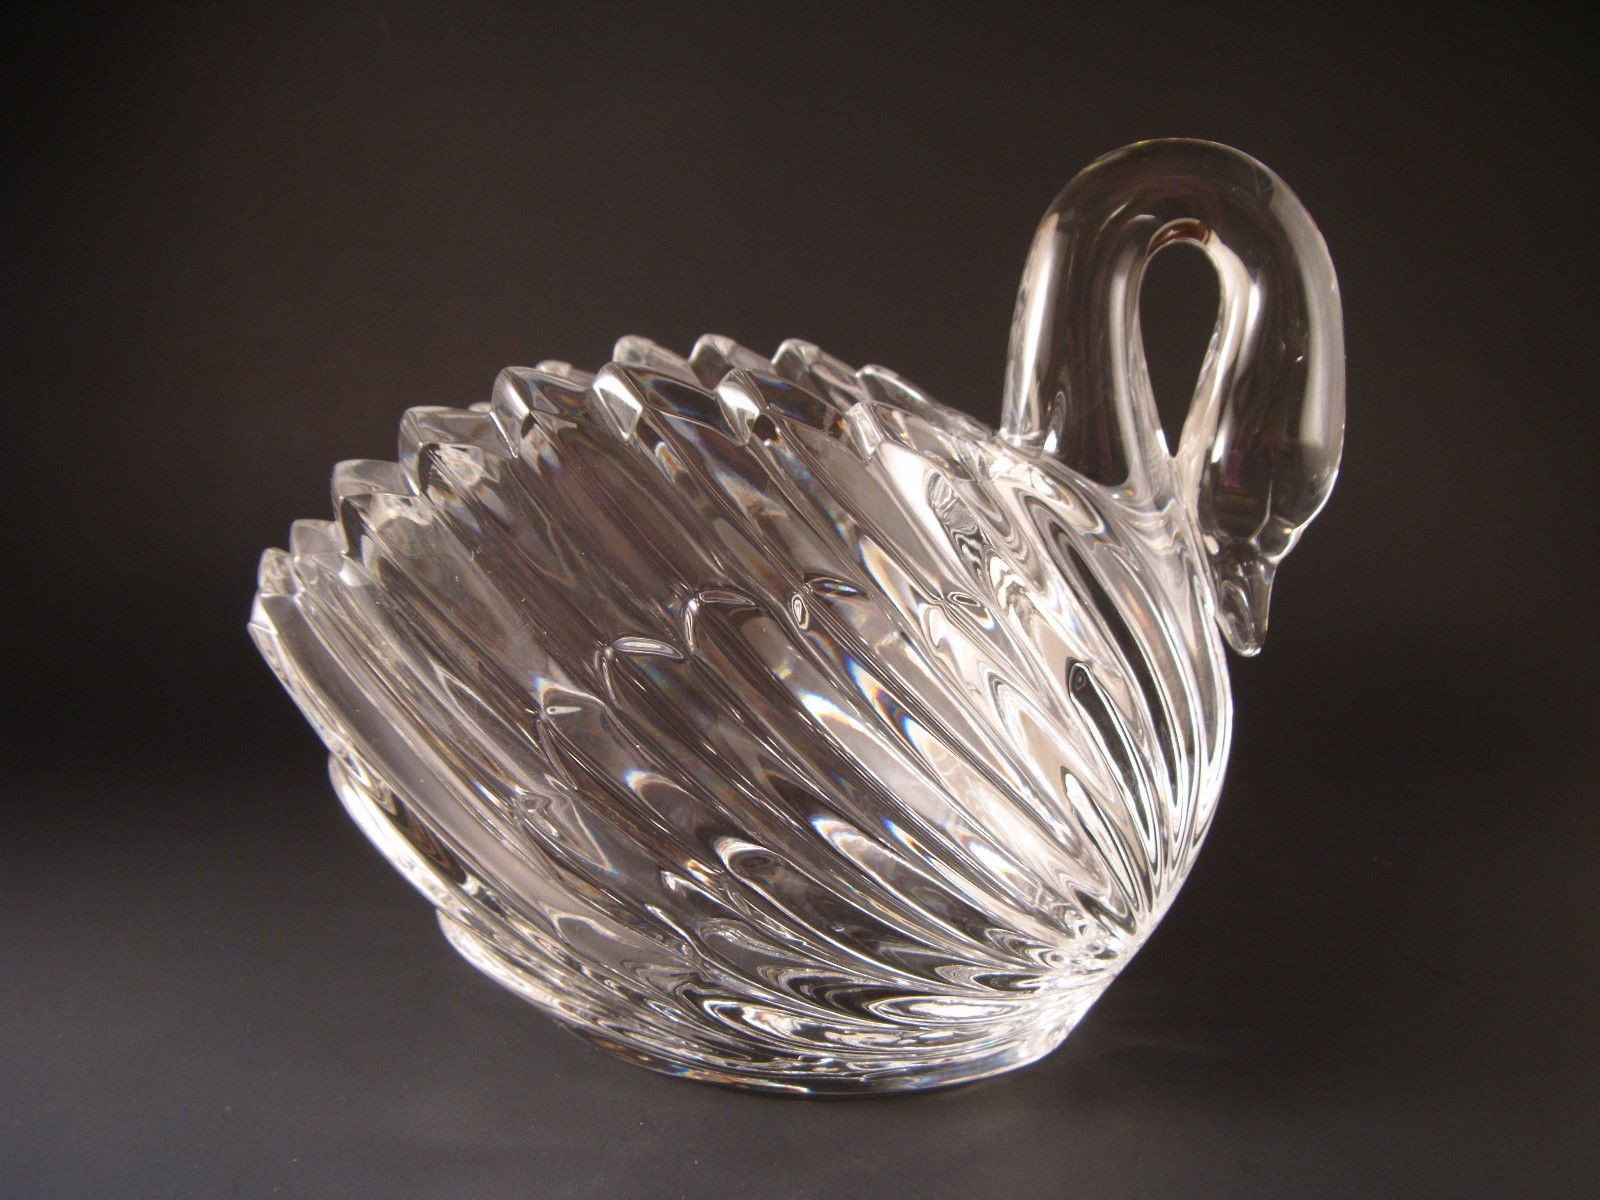 18 Ideal 6 Inch Crystal Vase 2024 free download 6 inch crystal vase of nachtmann crystal swan vase bowl 6 tall lead glass germany throughout nachtmann crystal swan vase bowl 6 tall lead glass germany bleikristall ebay